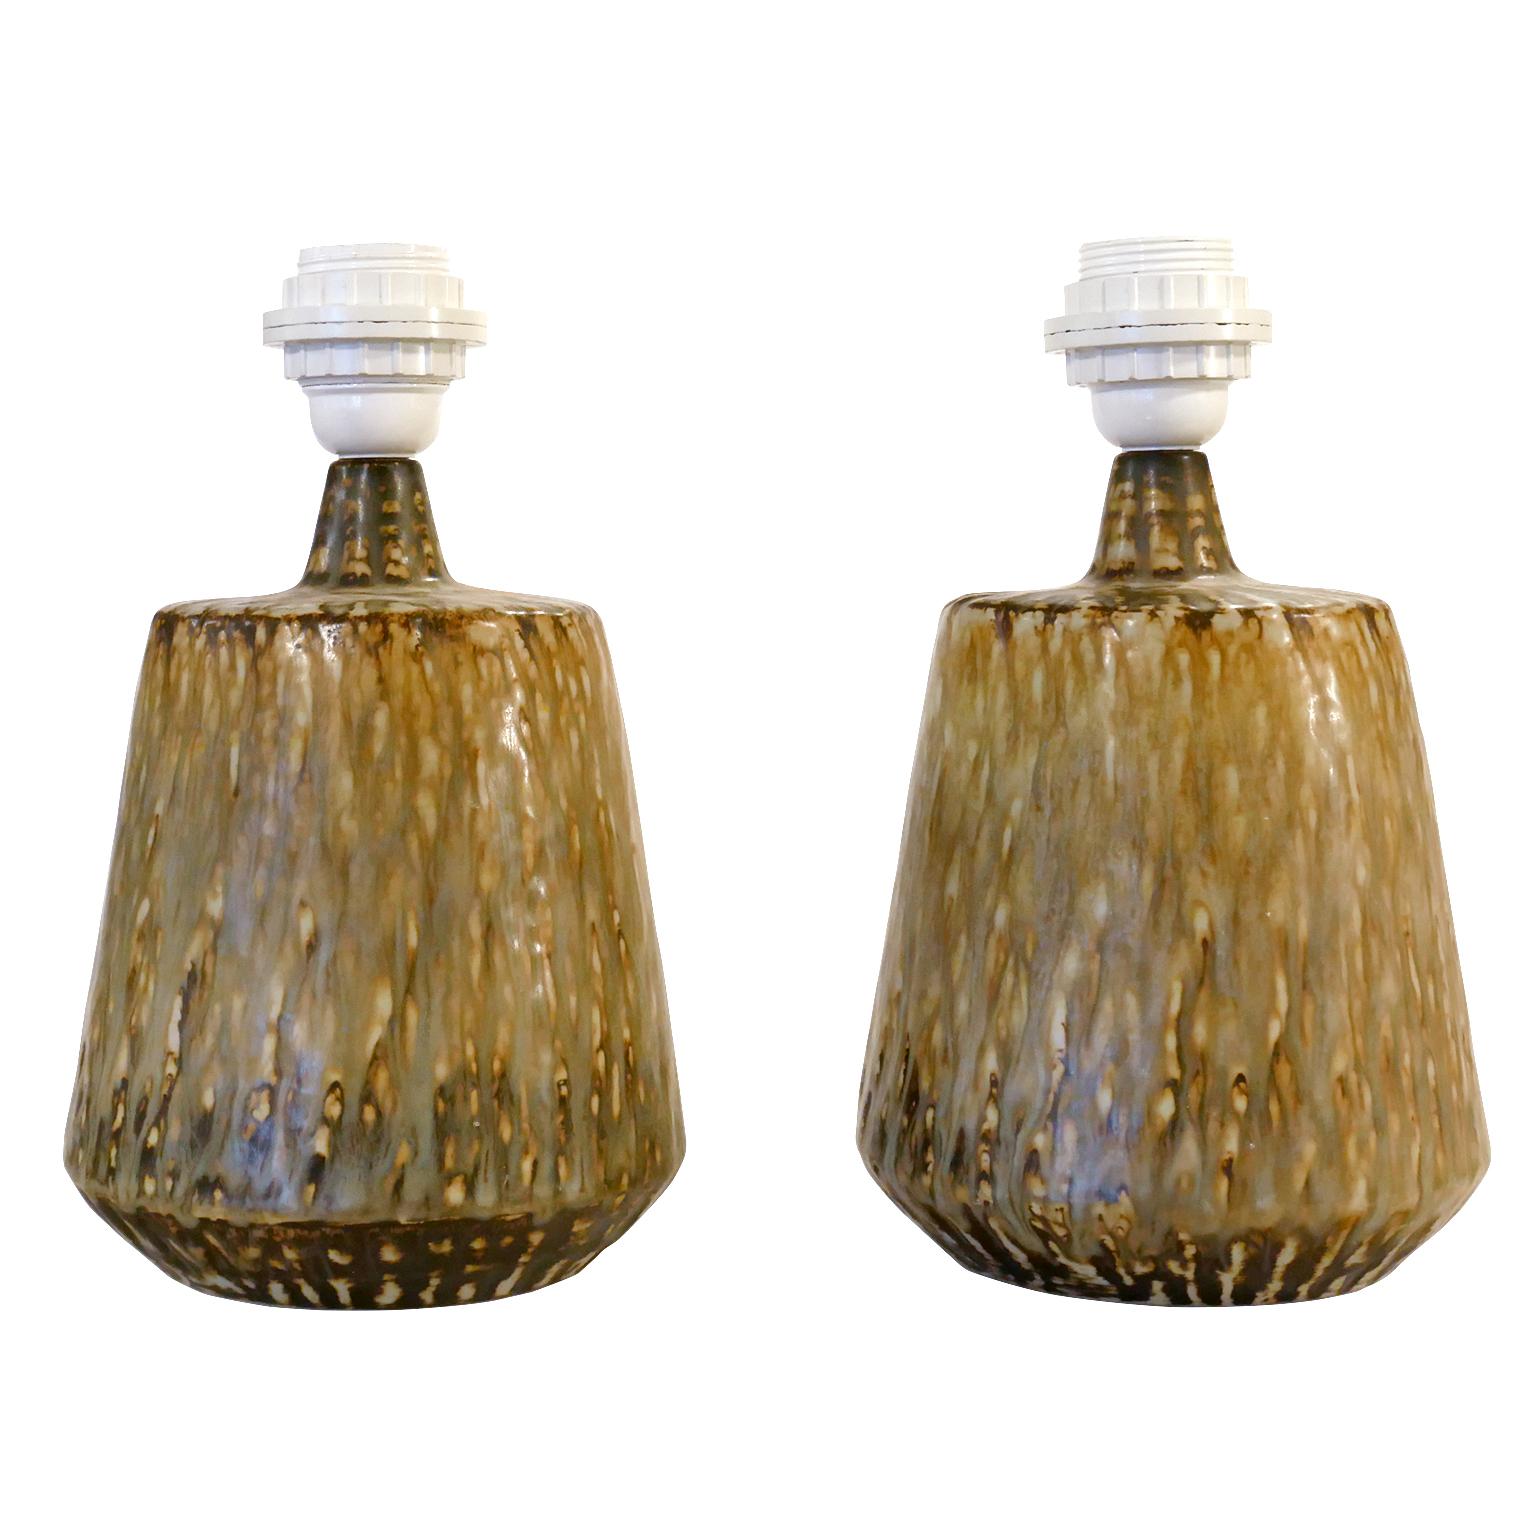 Ceramic Table Lamps by Gunnar Nylund for Rörstrand, Sweden, 1960s For Sale